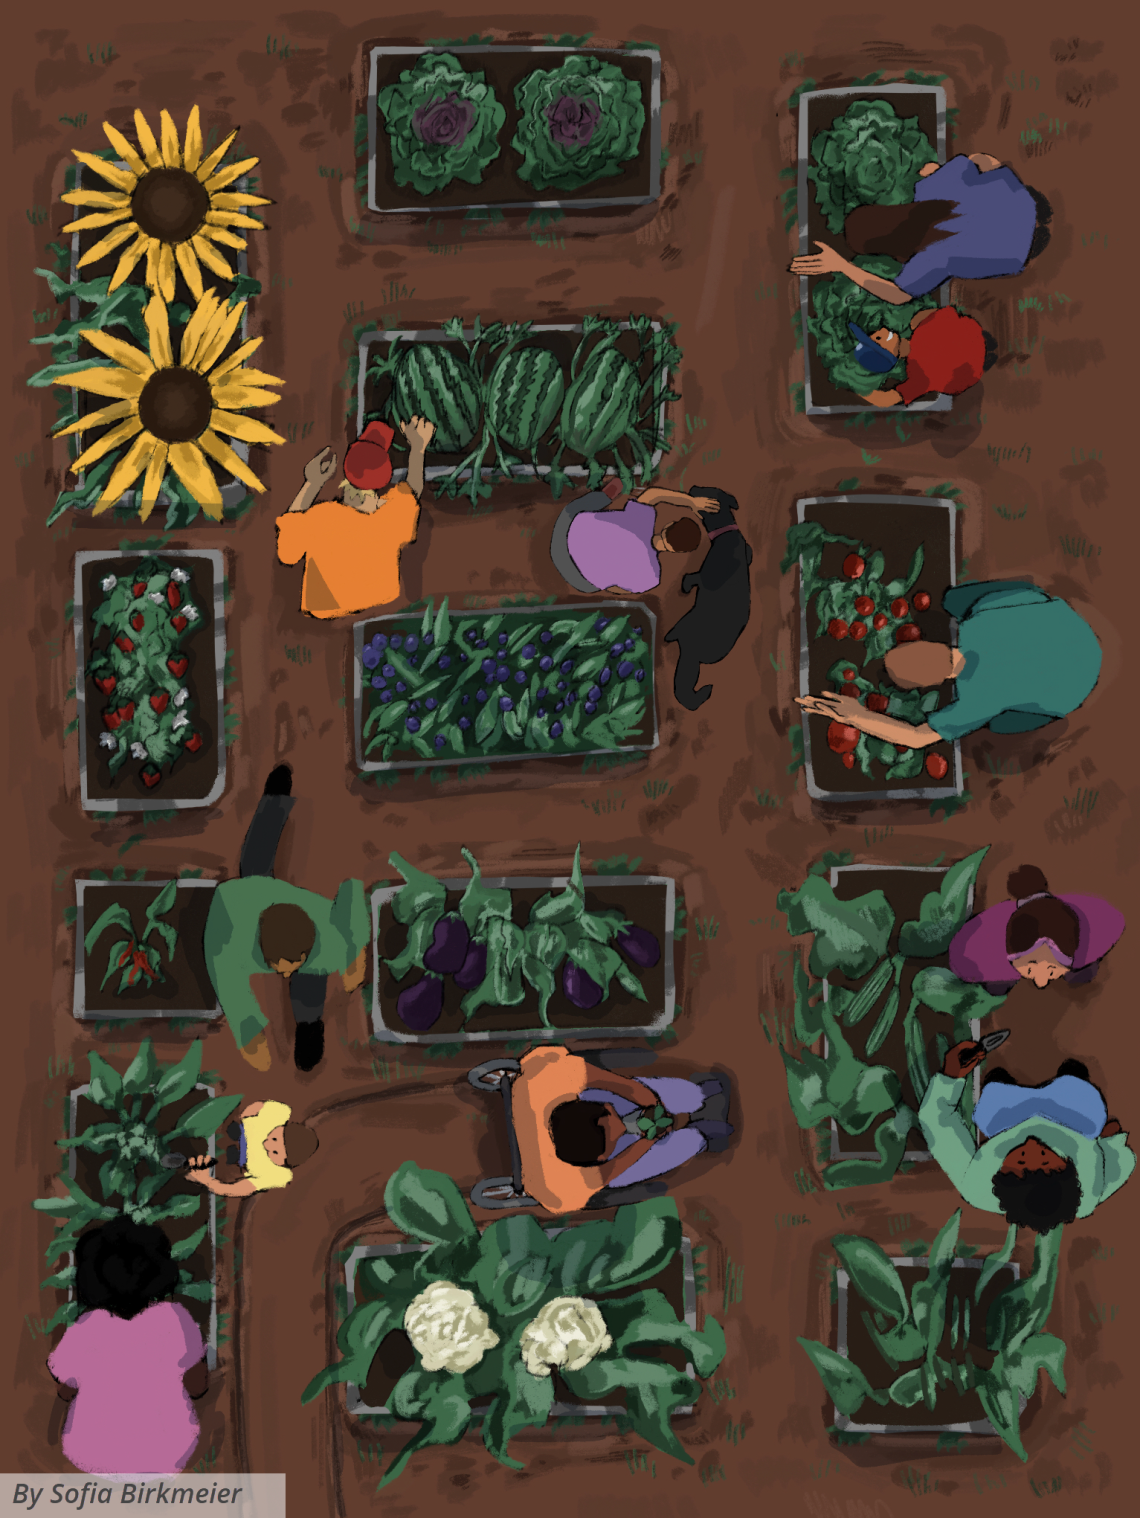 An illustration of an aerial view of people of different races, ages, and physical abilities tending to garden beds containing flowers, fruits, and vegetables.